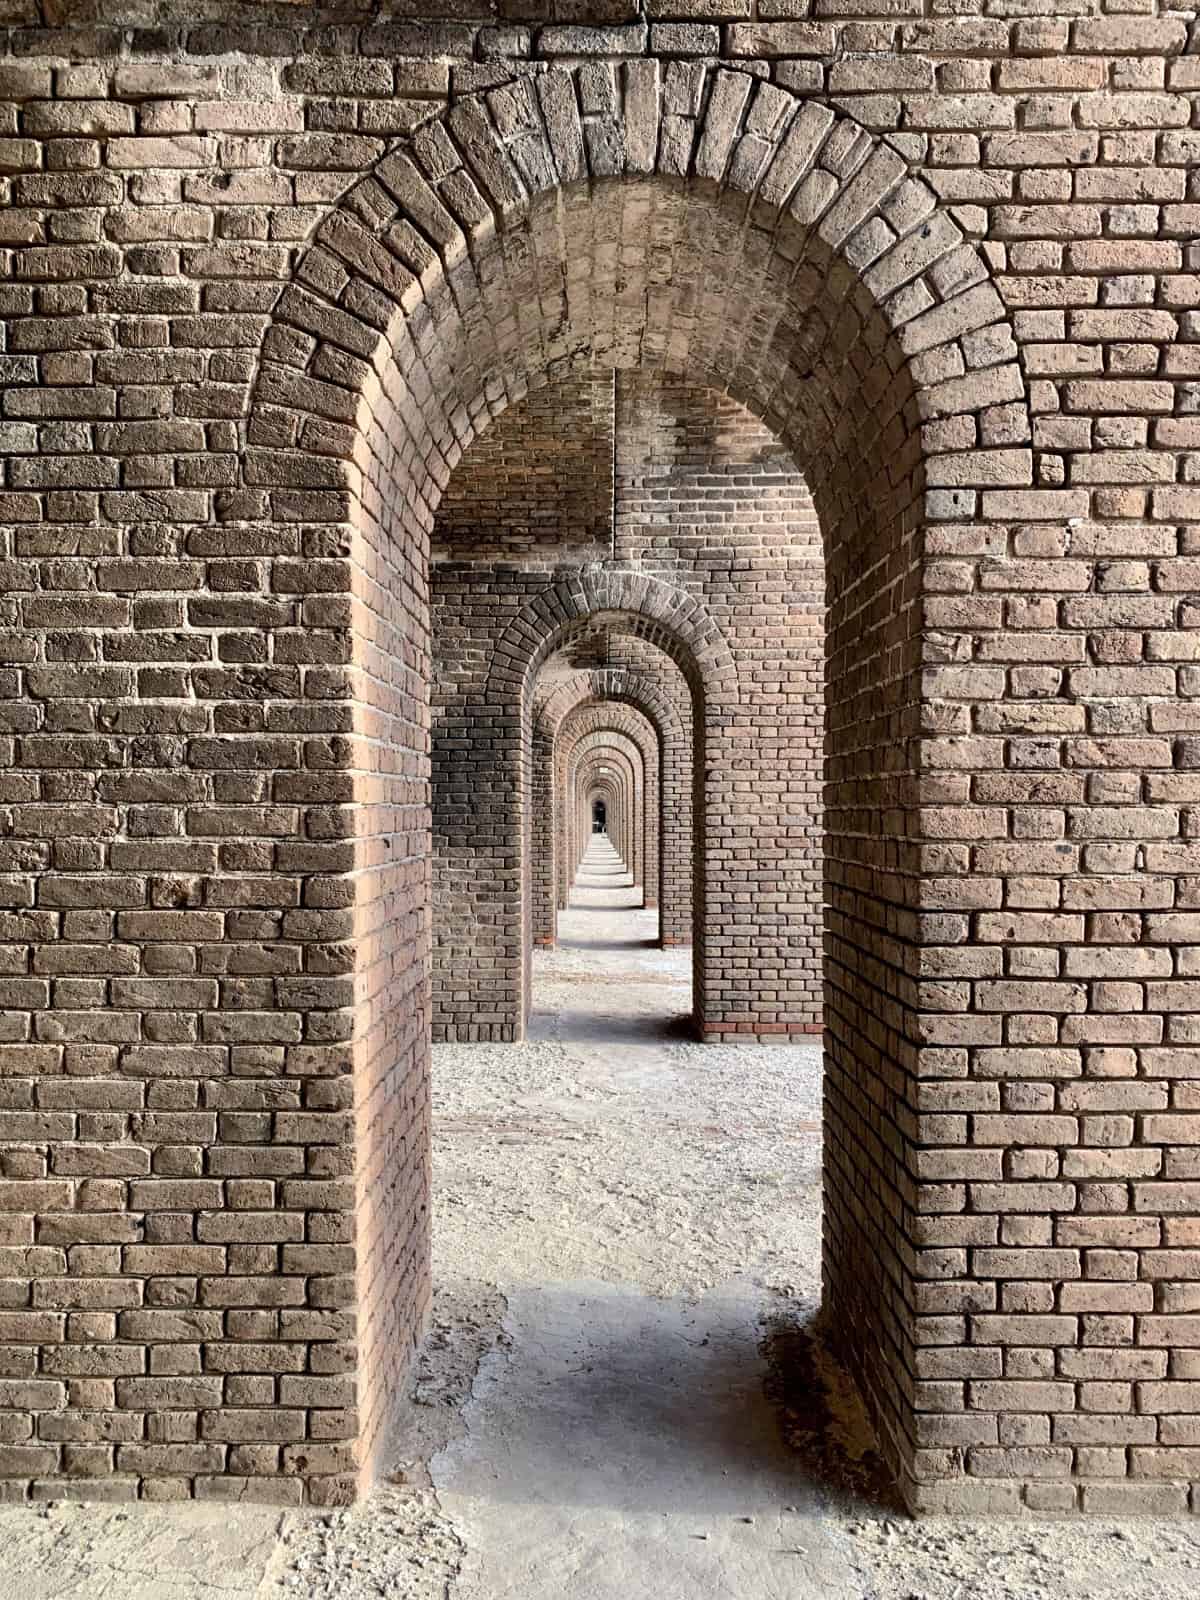 Fort Jefferson has over 2,000 arches in its brickwork!